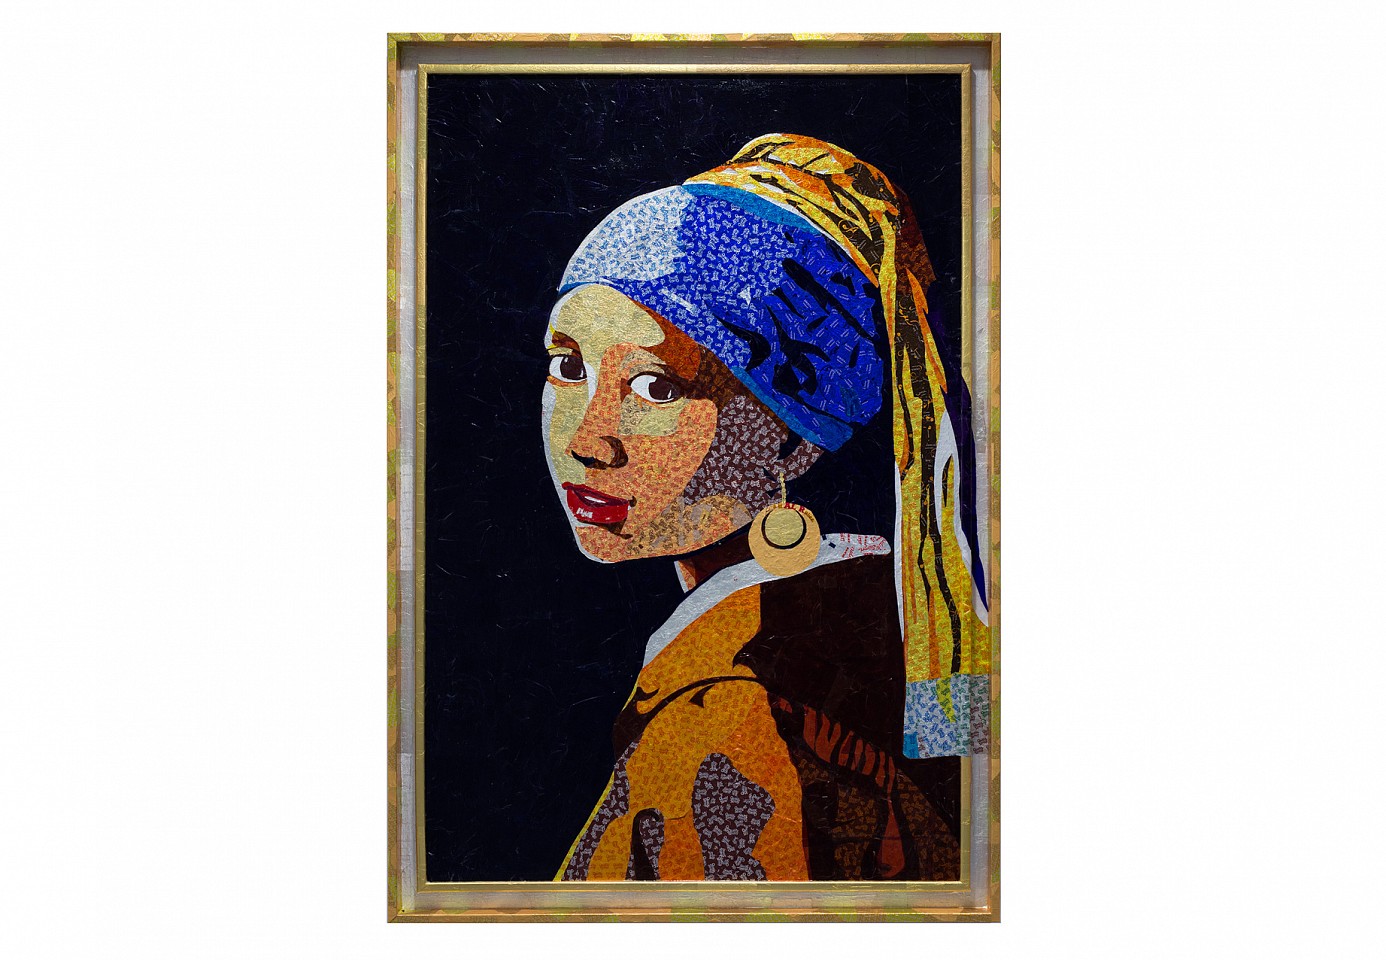 <p><span class="viewer-caption-artist">Ghada Al Rabea</span></p>
<p><span class="viewer-caption-title"><i>Girl With The Gold Earring</i></span>, <span class="viewer-caption-year">2014</span></p>
<p><span class="viewer-caption-media">Candy wrappers on wood</span></p>
<p><span class="viewer-caption-dimensions">132.7 x 91.5 x 4 cm (52 3/16 x 36 x 1 9/16 in.)</span></p>
<p><span class="viewer-caption-inventory">GAD0018</span></p>
<p><span class="viewer-caption-aux"></span></p>